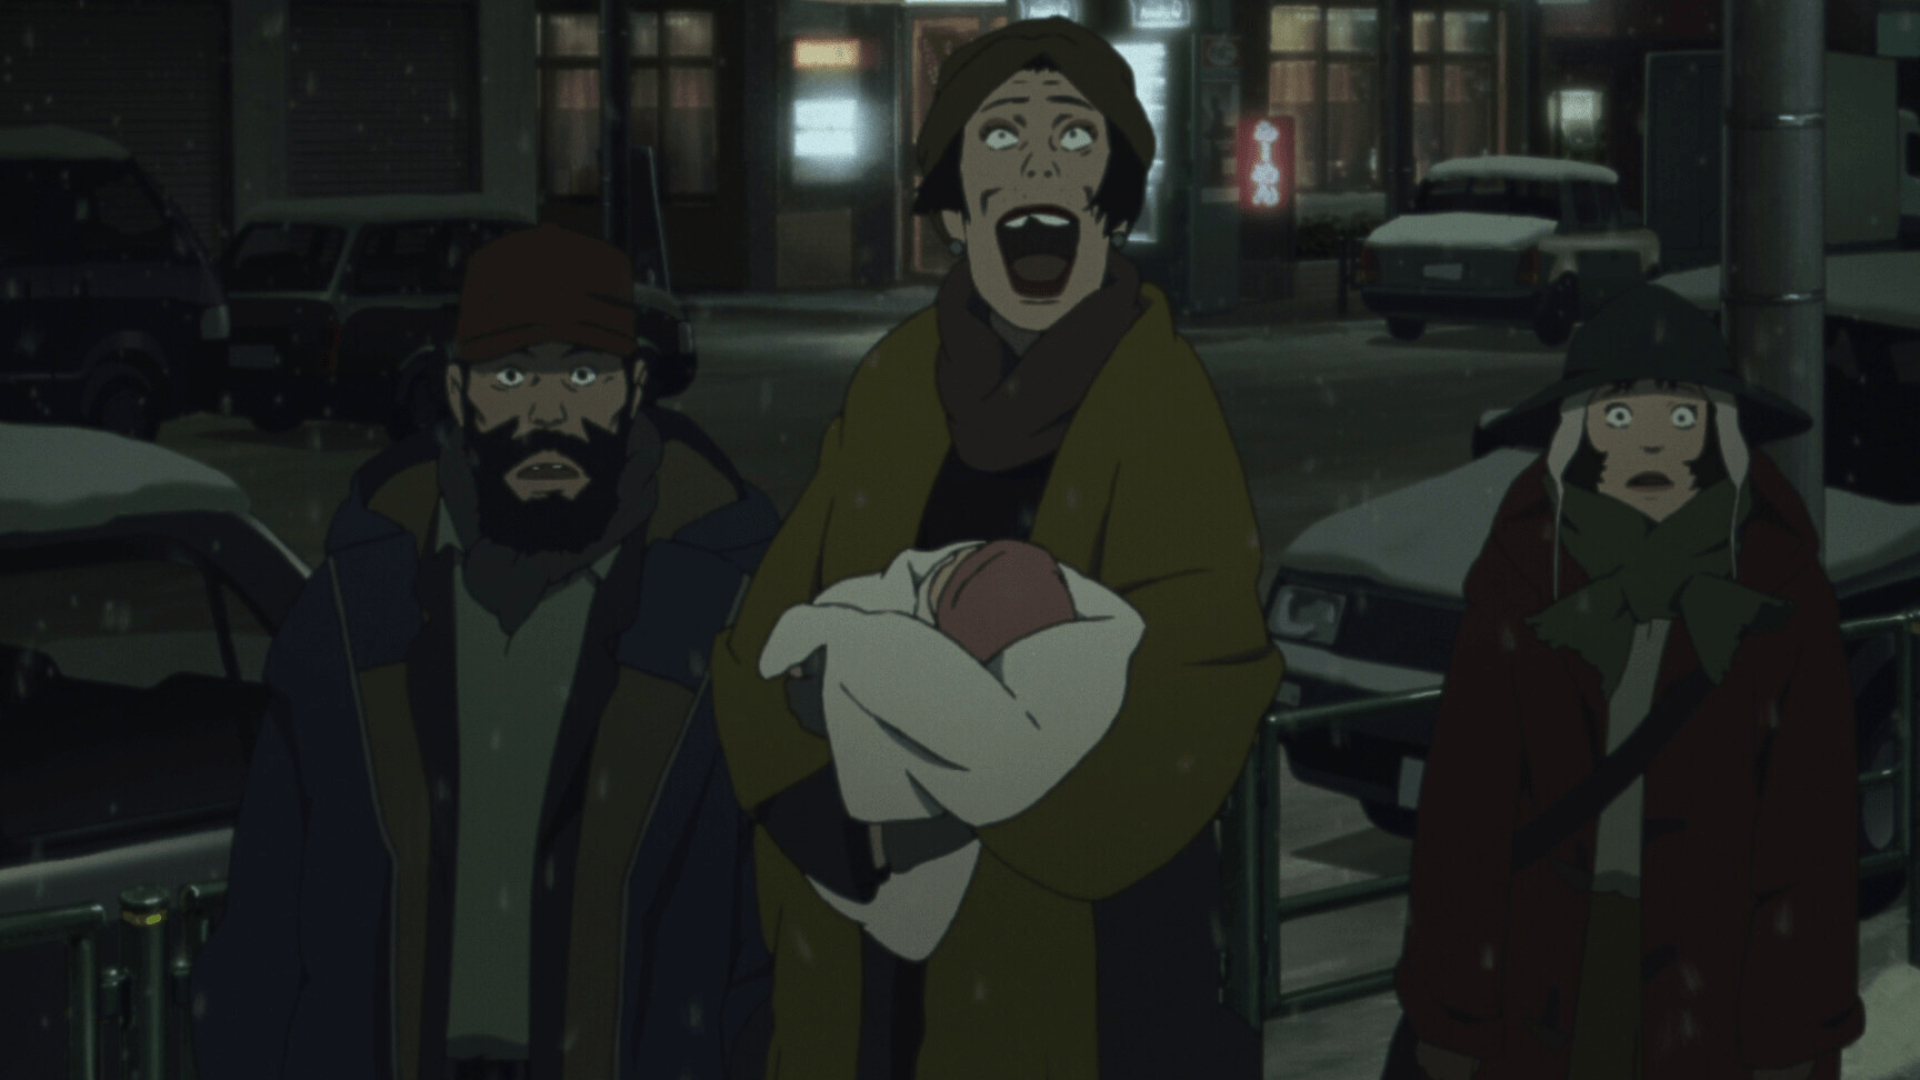 Tokyo Godfathers, Vibrant wallpapers, Cave of wonders, Anime masterpiece, 1920x1080 Full HD Desktop